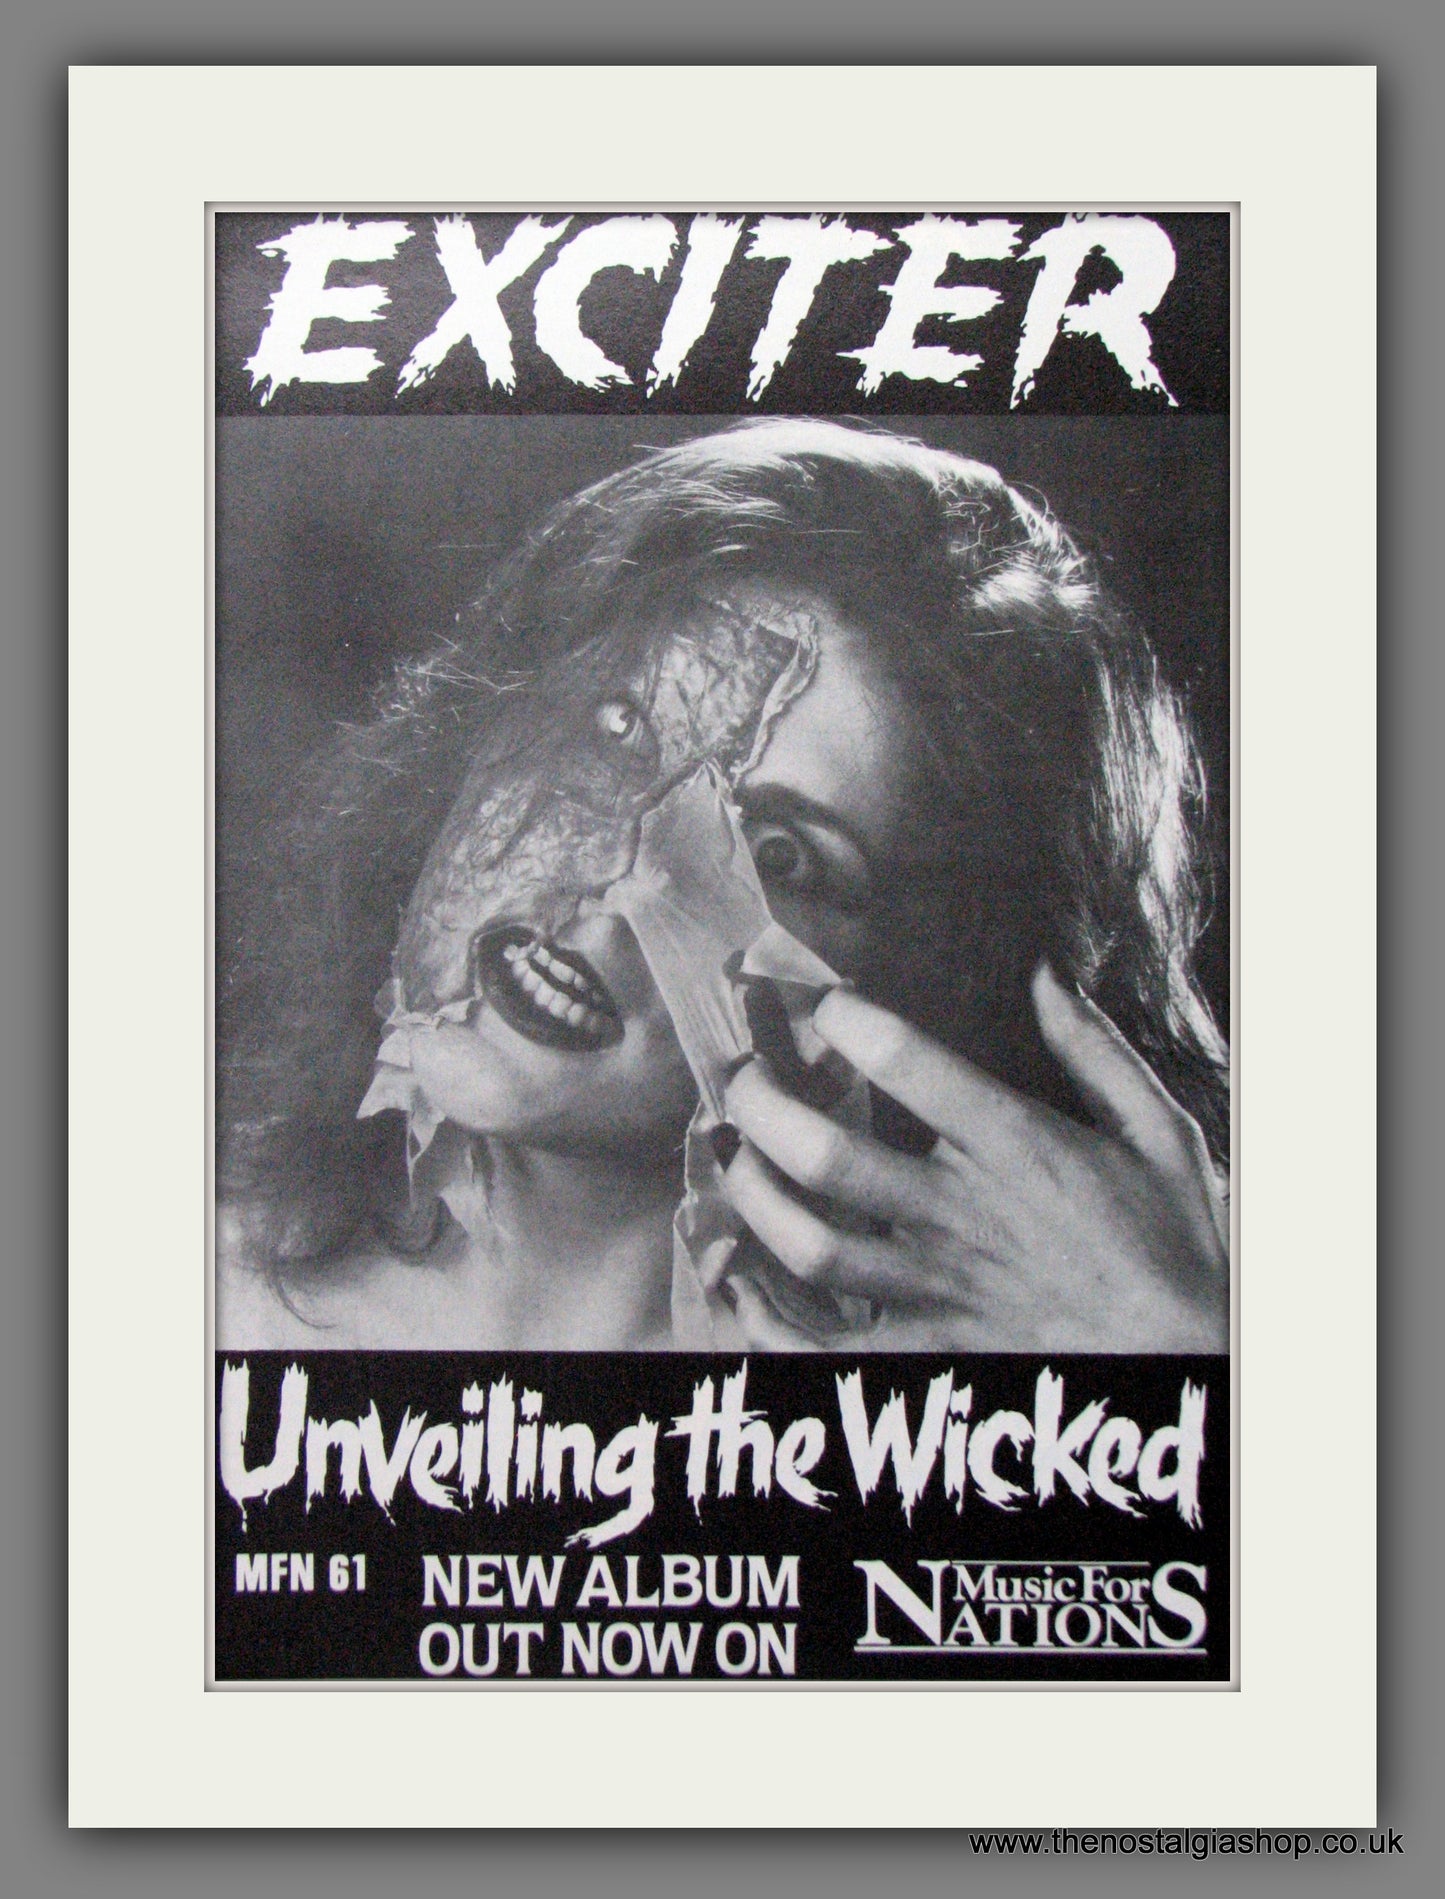 Exciter. Unveiling The Wicked. Original Advert 1986 (ref AD50236)